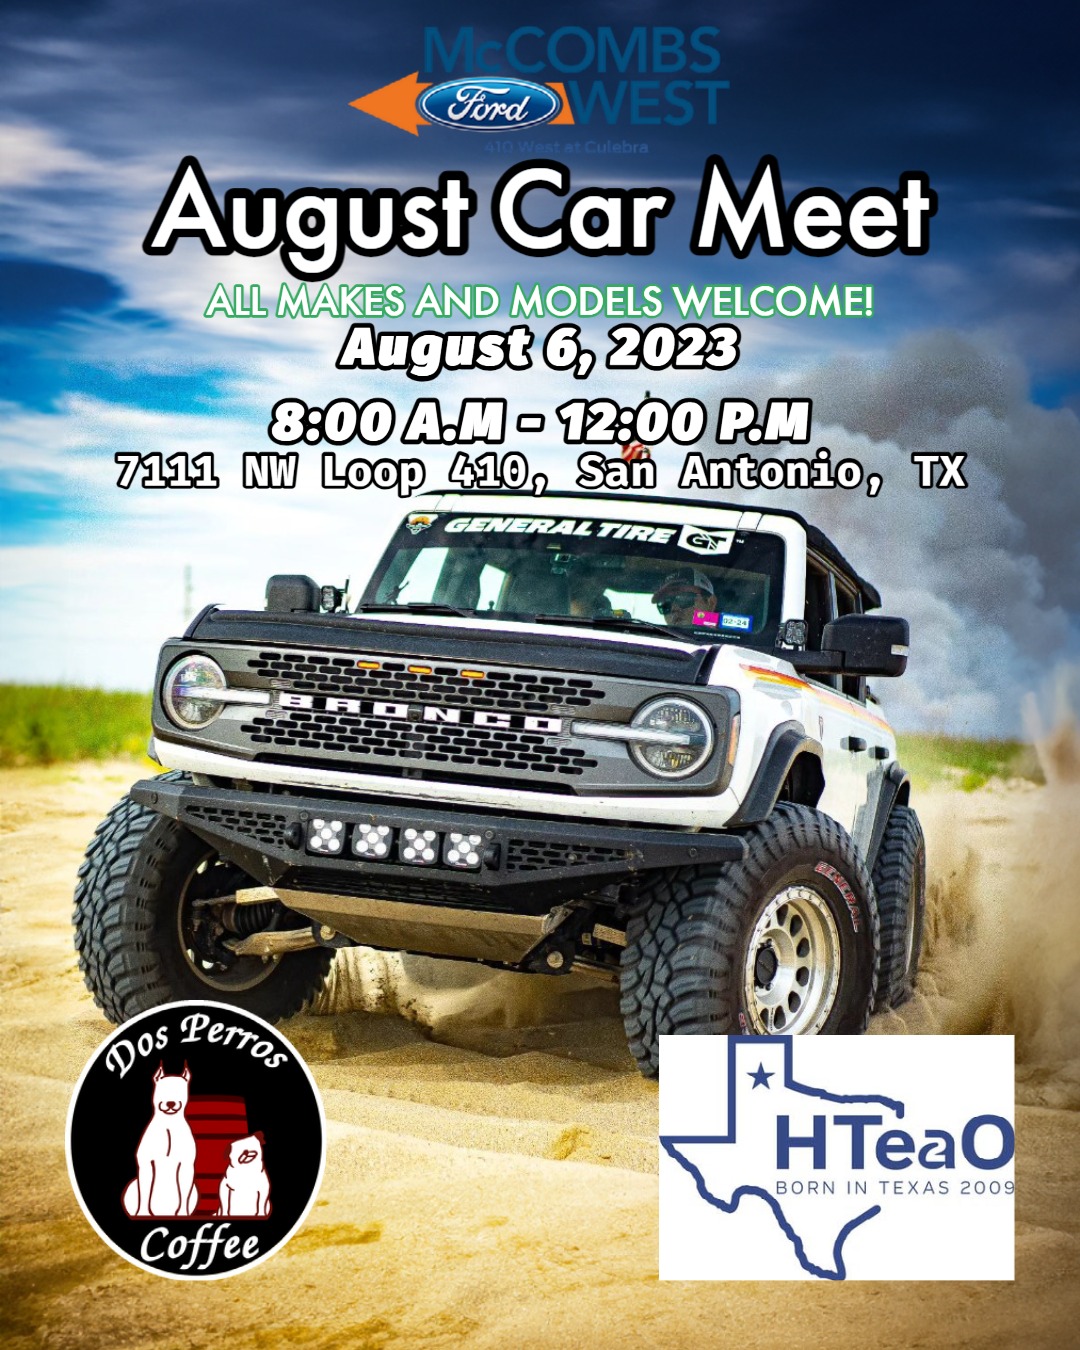 Bronco vehicle driving through the sand to promote McCombs West August Car Meet